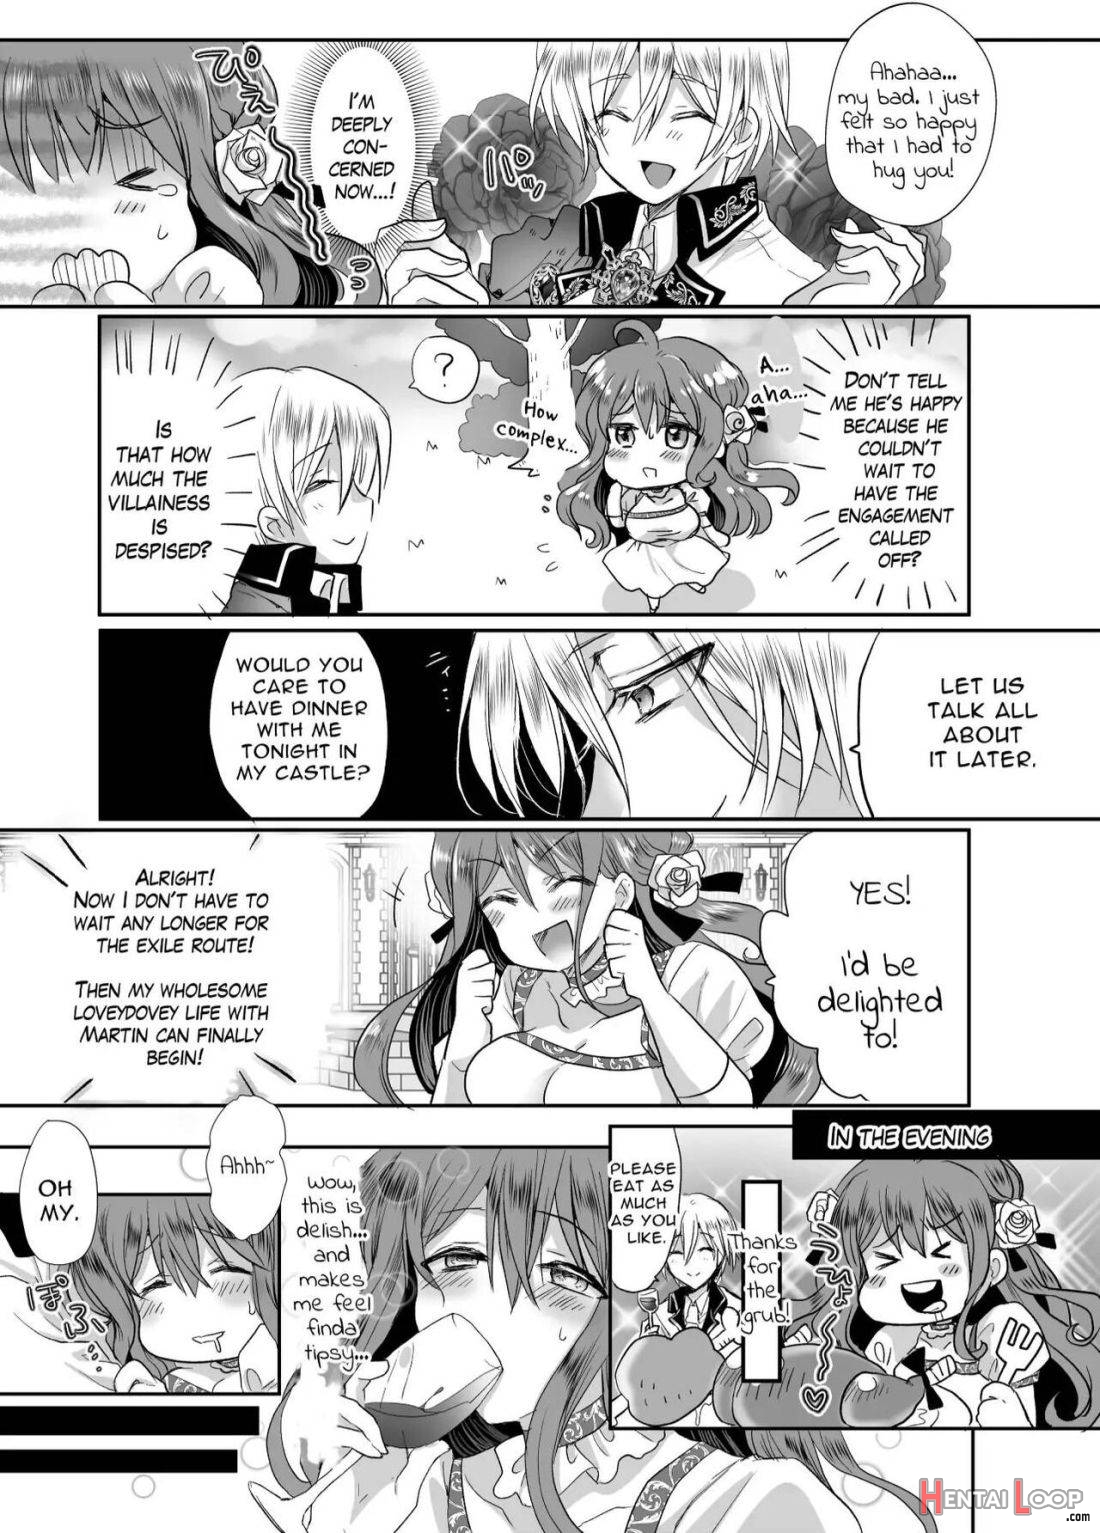  JK’s Tragic Isekai Reincarnation as the Villainess ~But My Precious Side Character!~ page 23